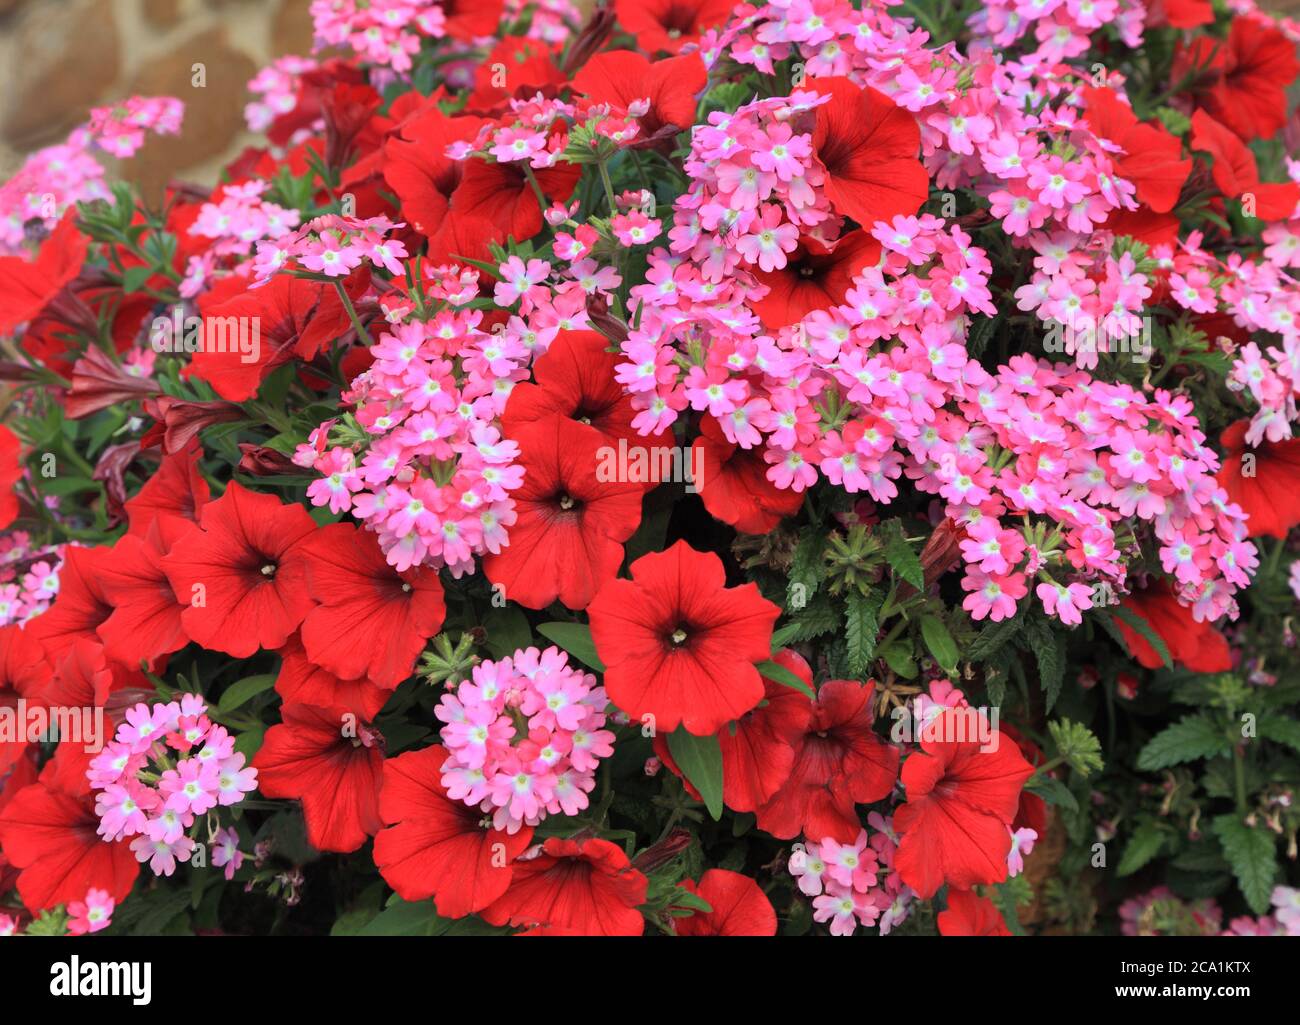 Hanging basket, red and pink combination, petunias, detail, petunia, bedding plants Stock Photo